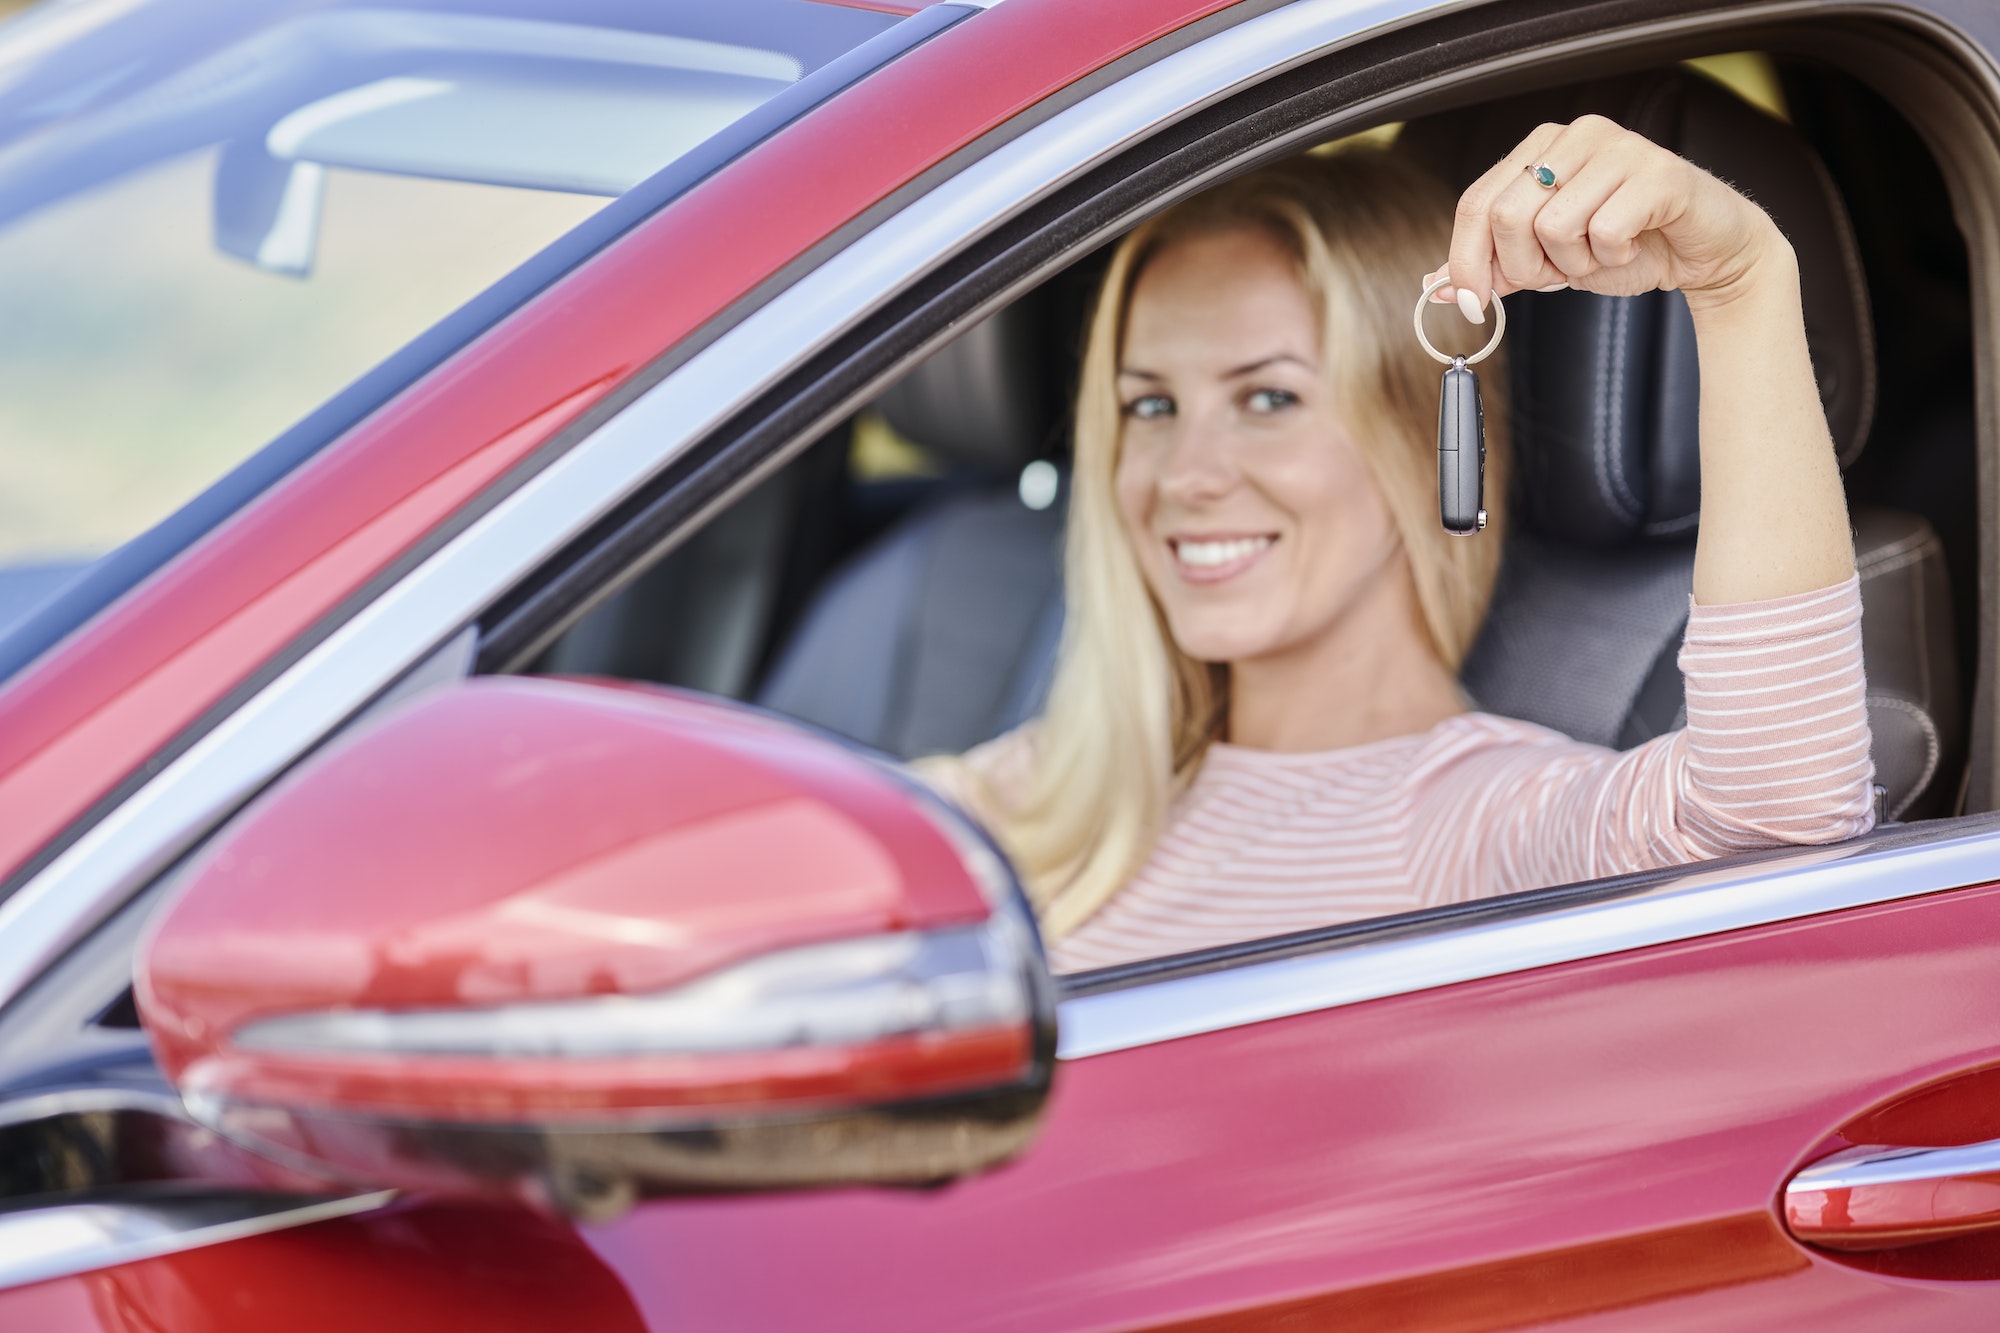 Smiling woman in the car with the keys